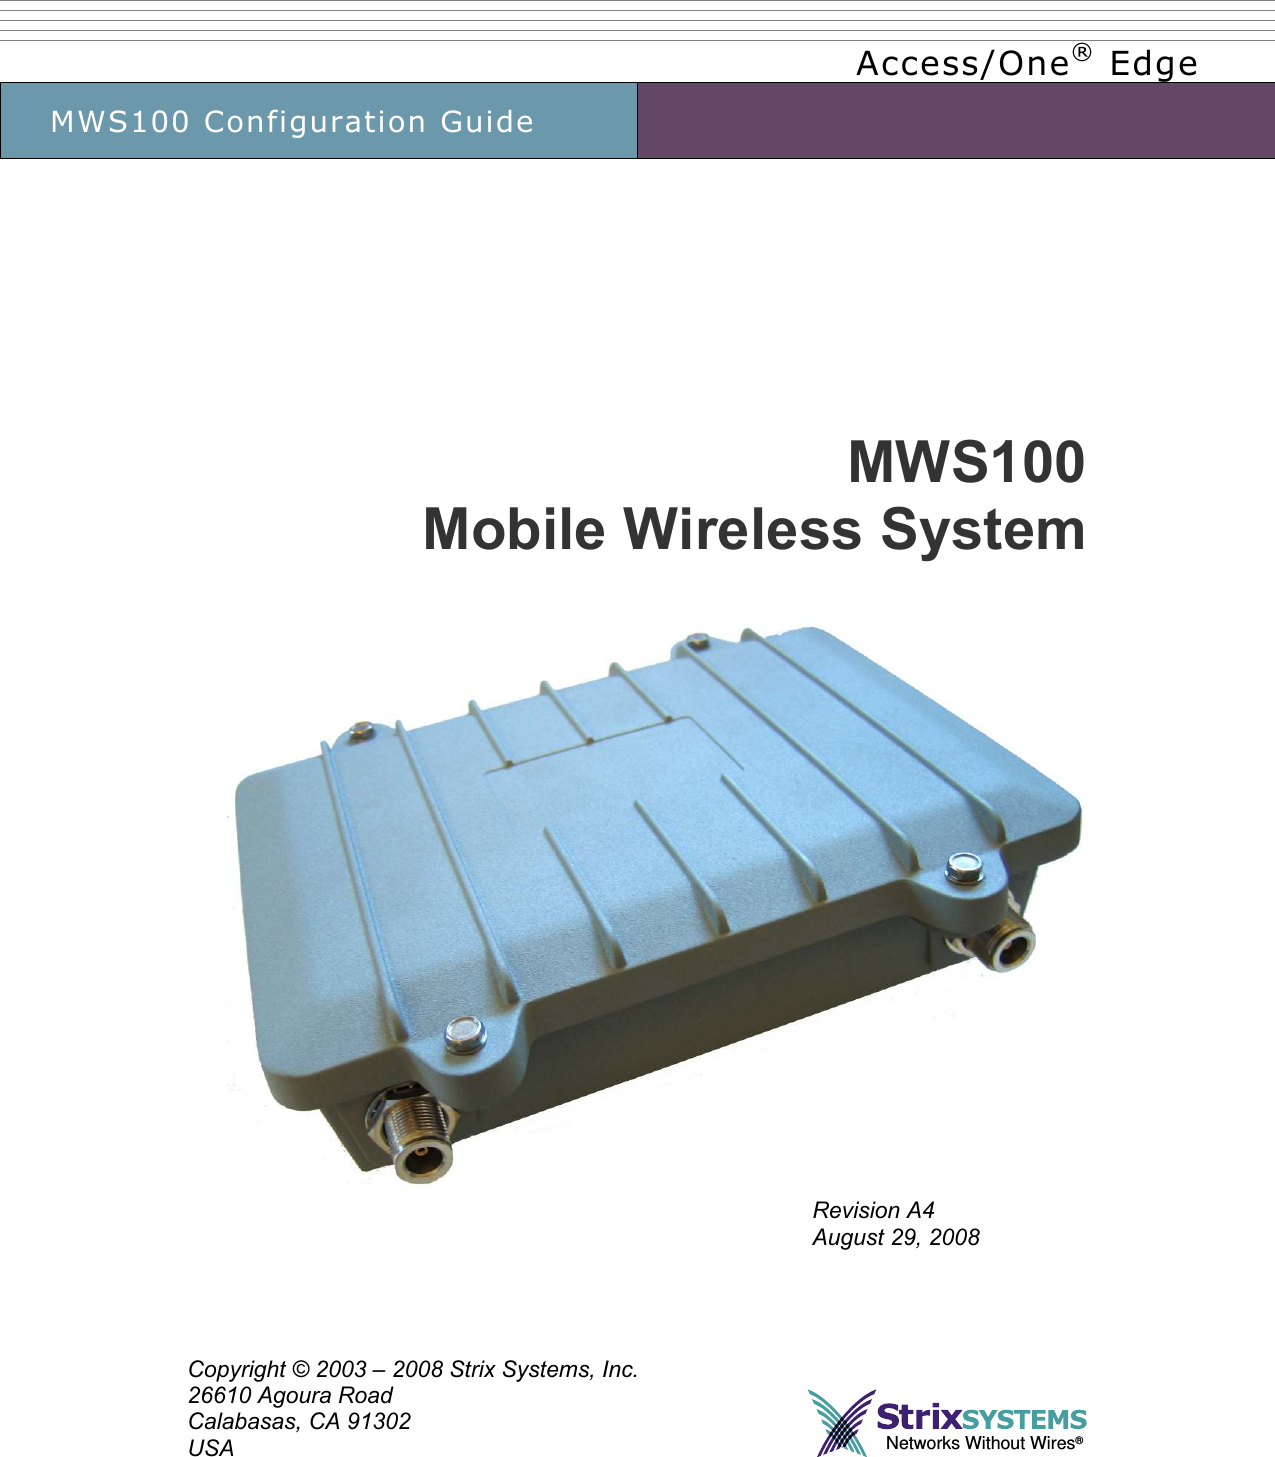      Access/One® Edge MWS100 Configuration Guide                 MWS100 Mobile Wireless System   Revision A4 August 29, 2008     Copyright © 2003 – 2008 Strix Systems, Inc. 26610 Agoura Road Calabasas, CA 91302 USA  Networks Without Wires®